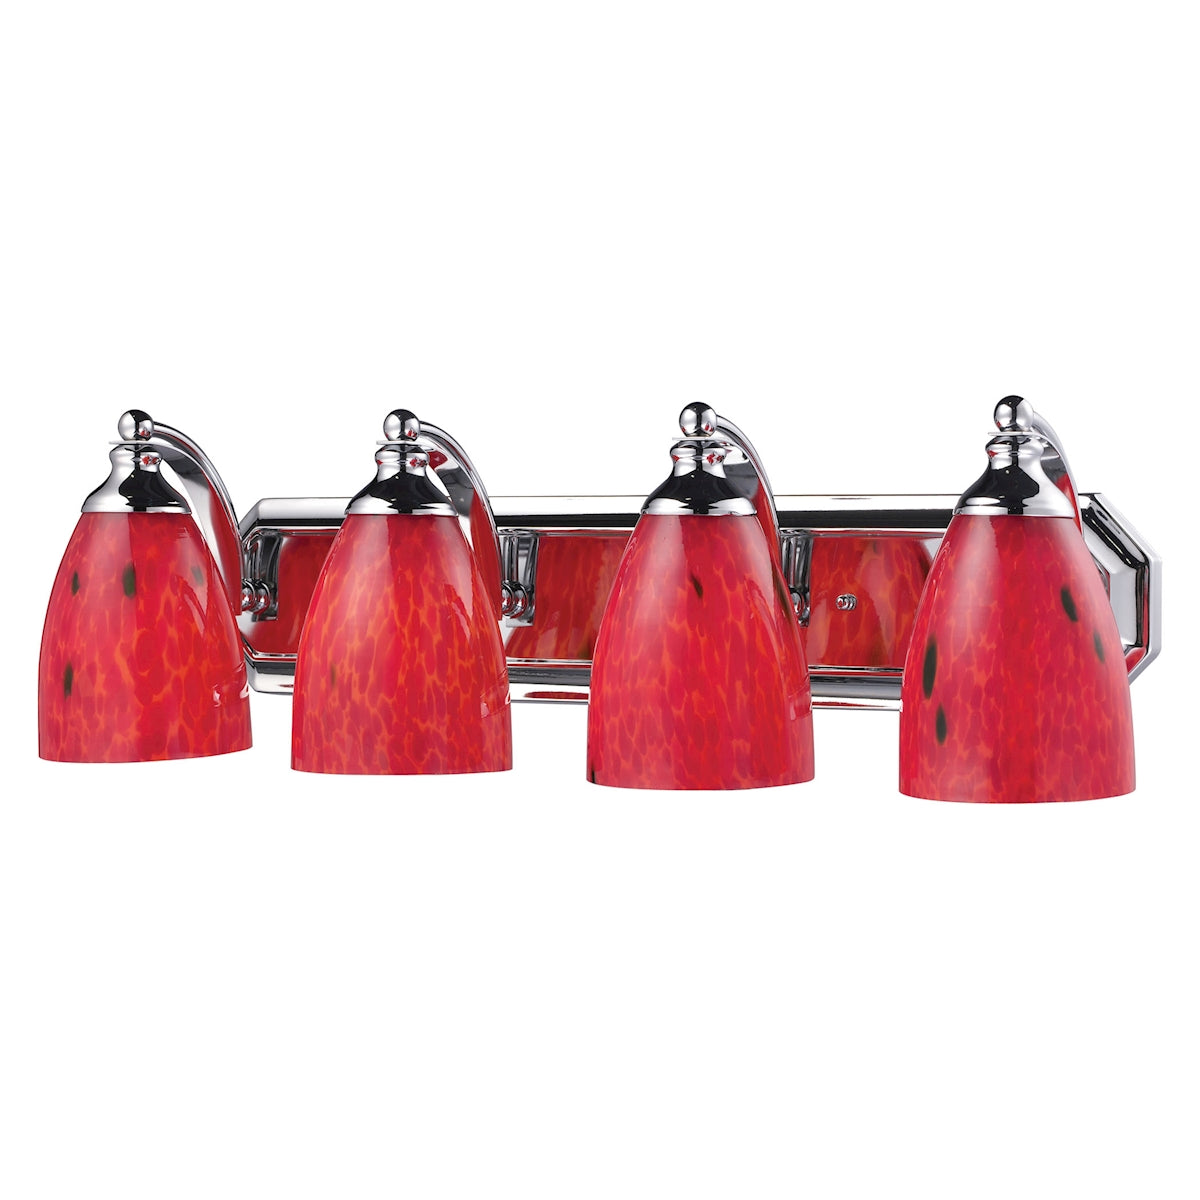 ELK Lighting 570-4C-FR Mix and Match Vanity 4-Light Wall Lamp in Chrome with Fire Red Glass